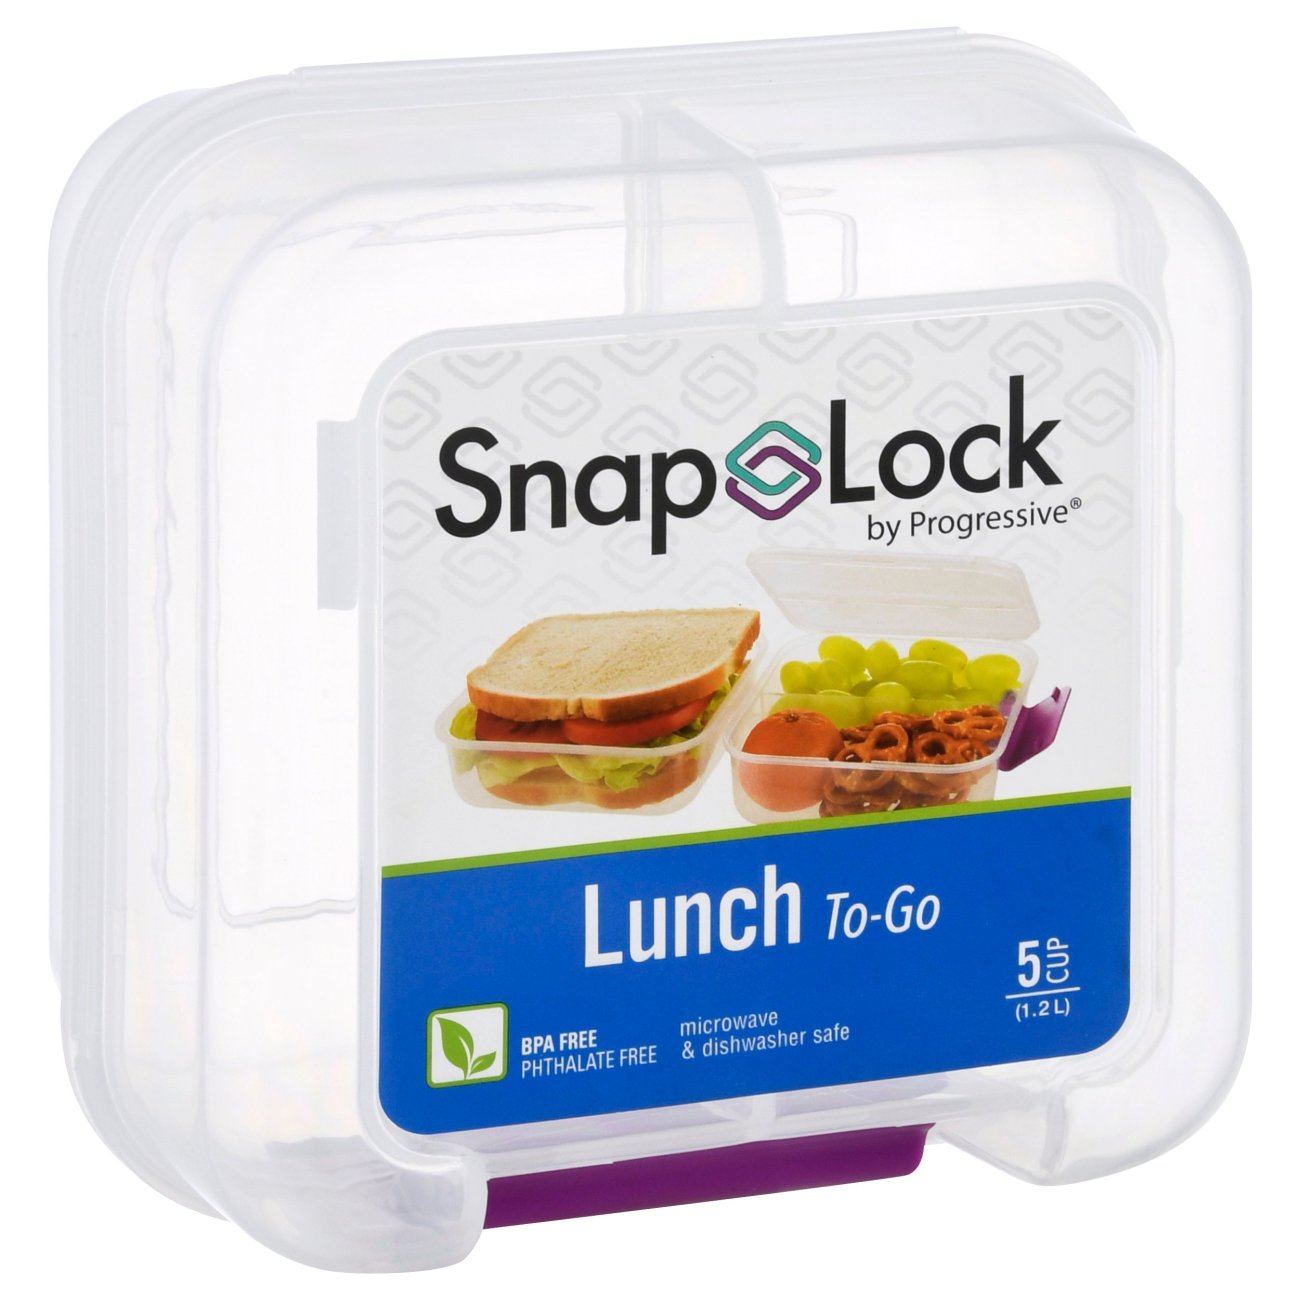 SnapLock. Quality food, anywhere, anytime.